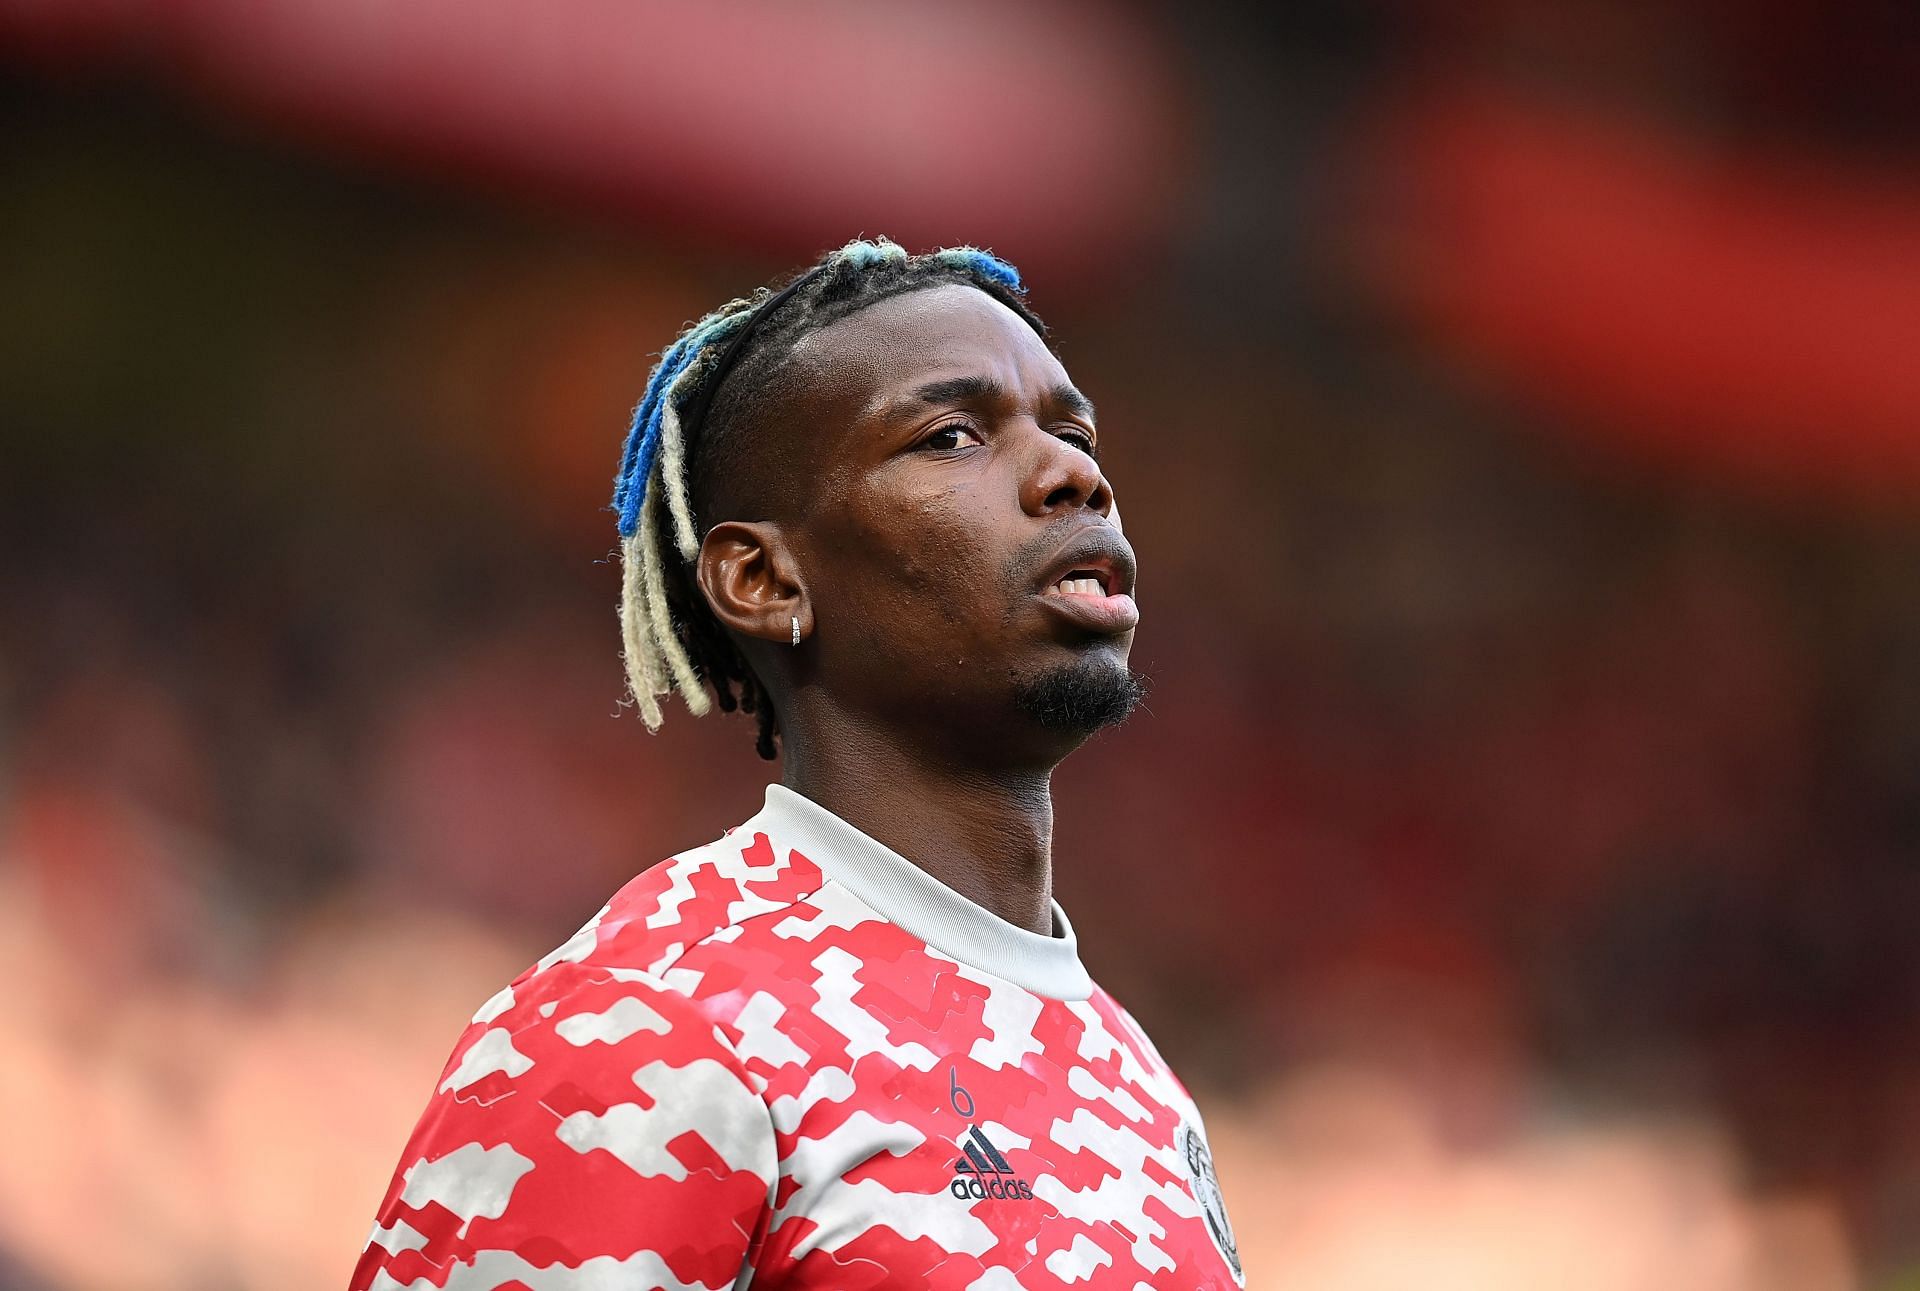 Manchester United midfielder Paul Pogba. (Photo by Michael Regan/Getty Images)